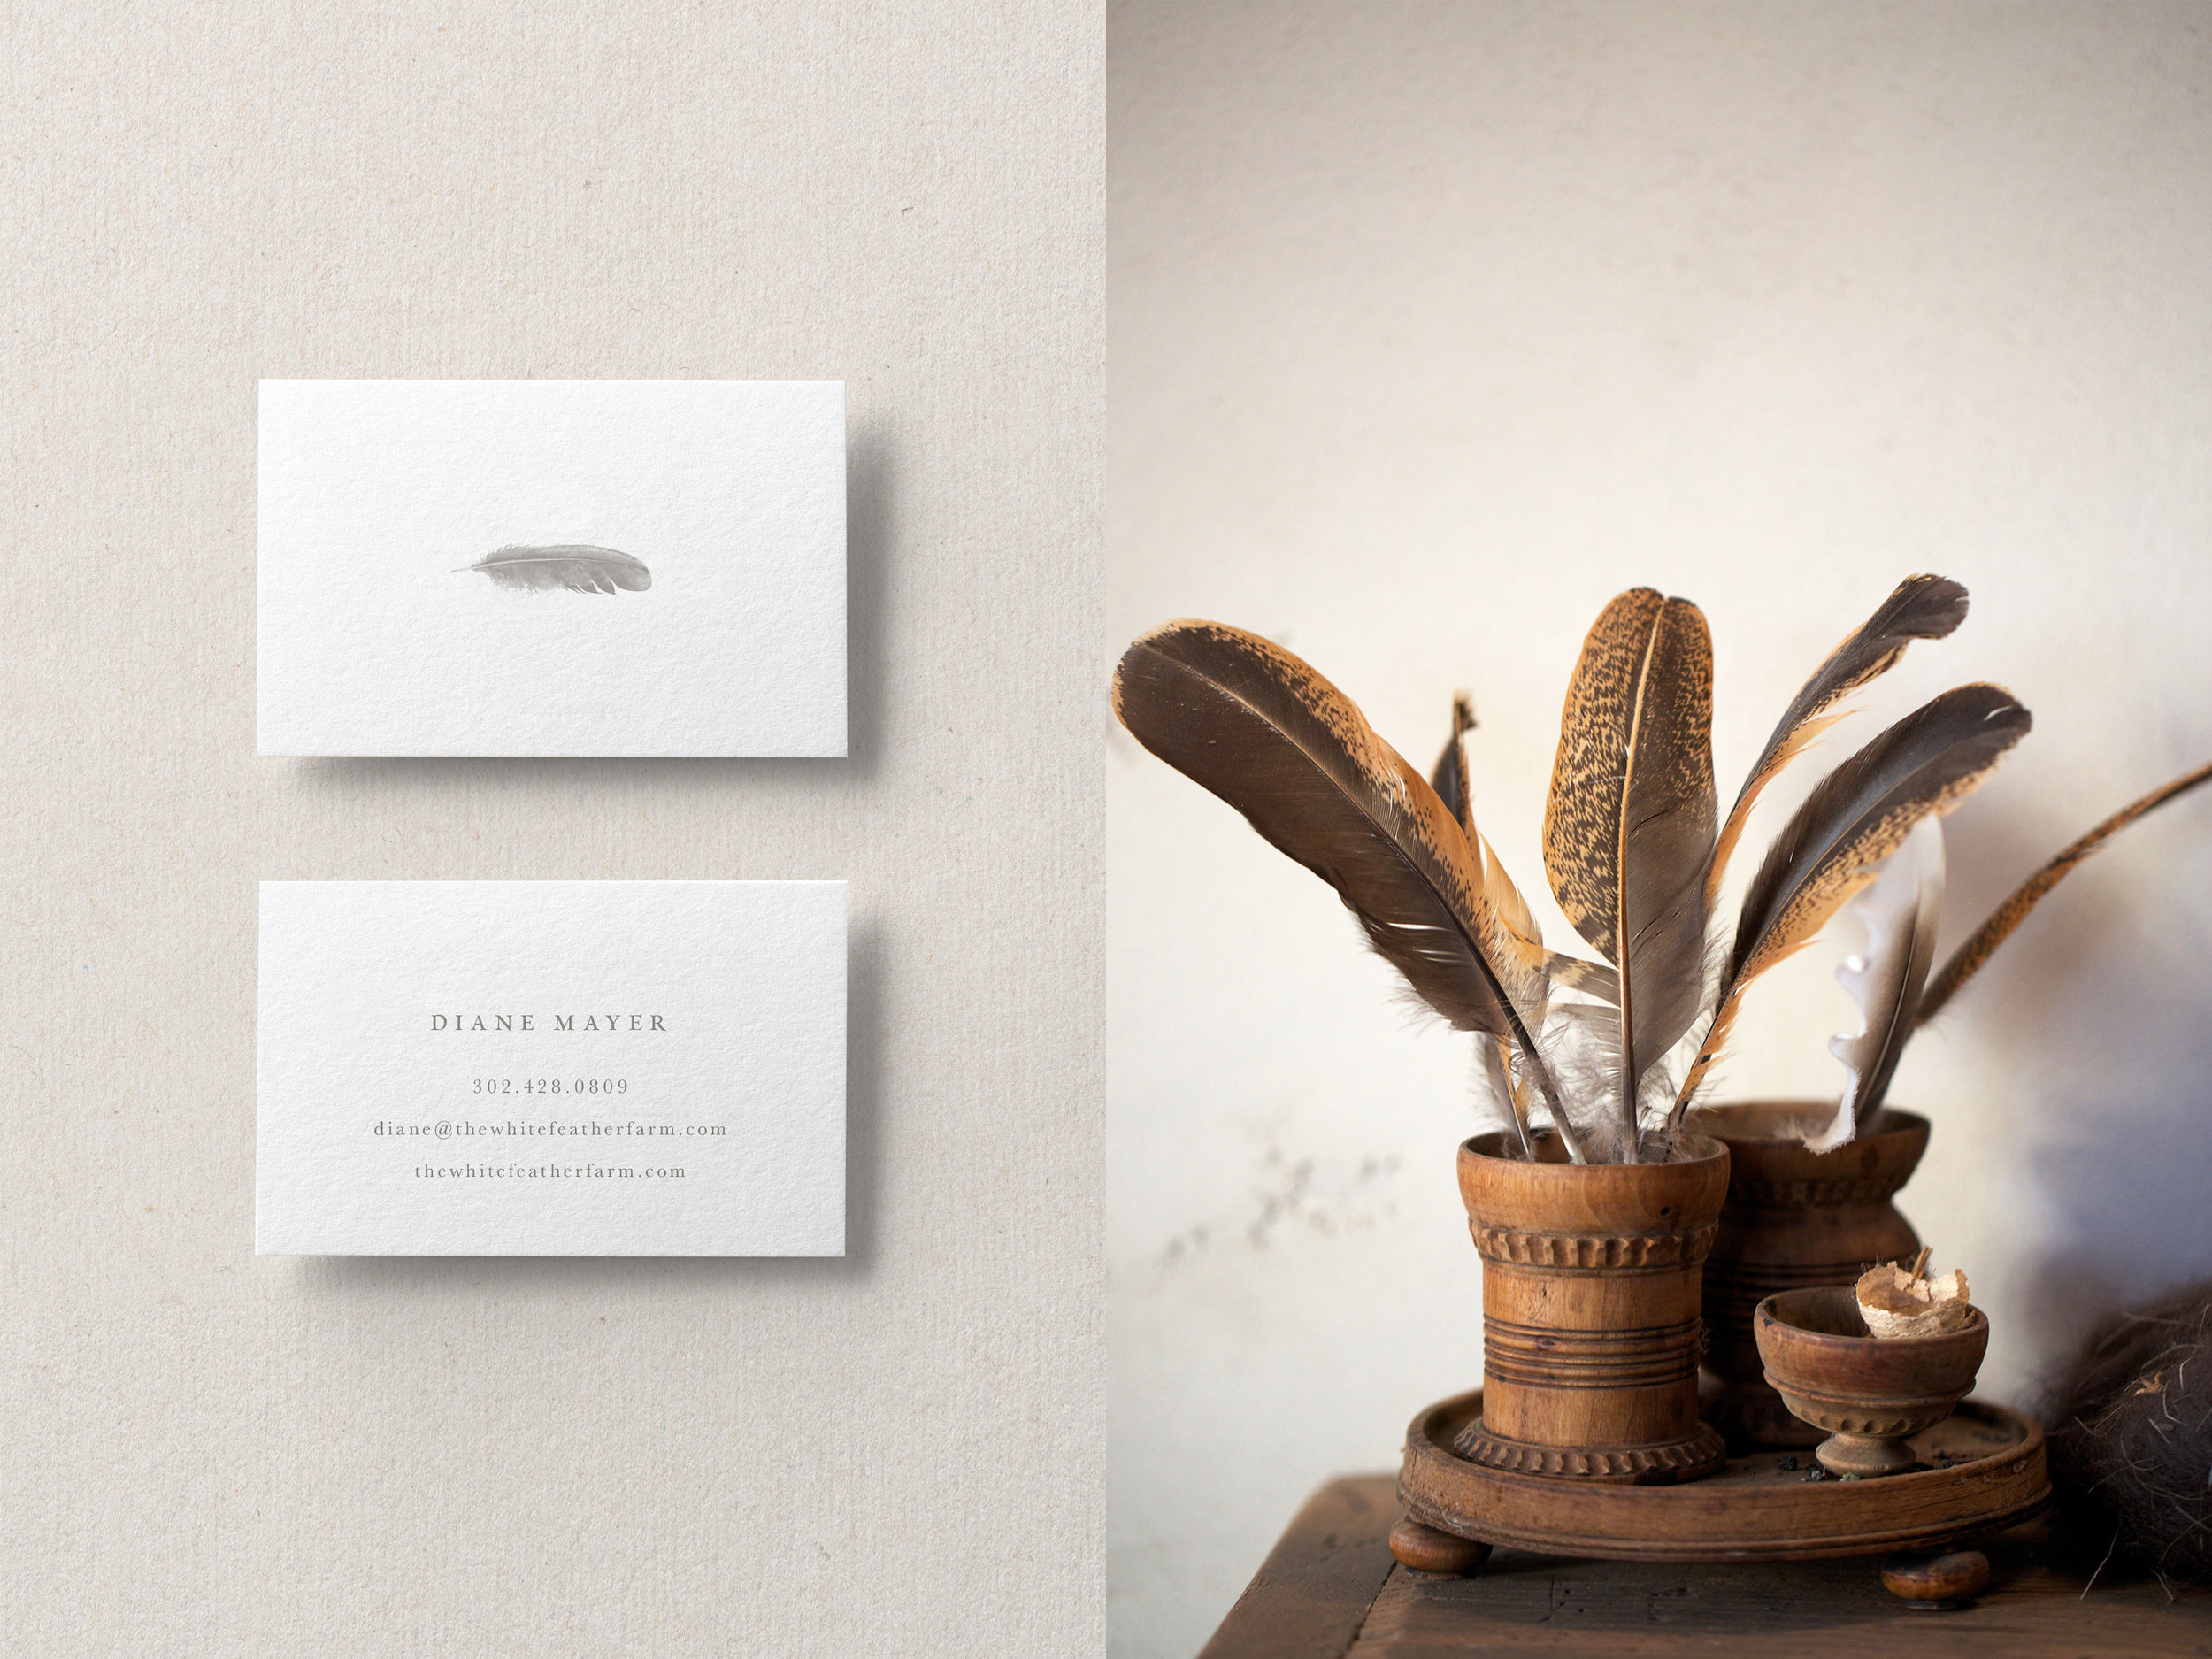 White Feather Farm Business Card